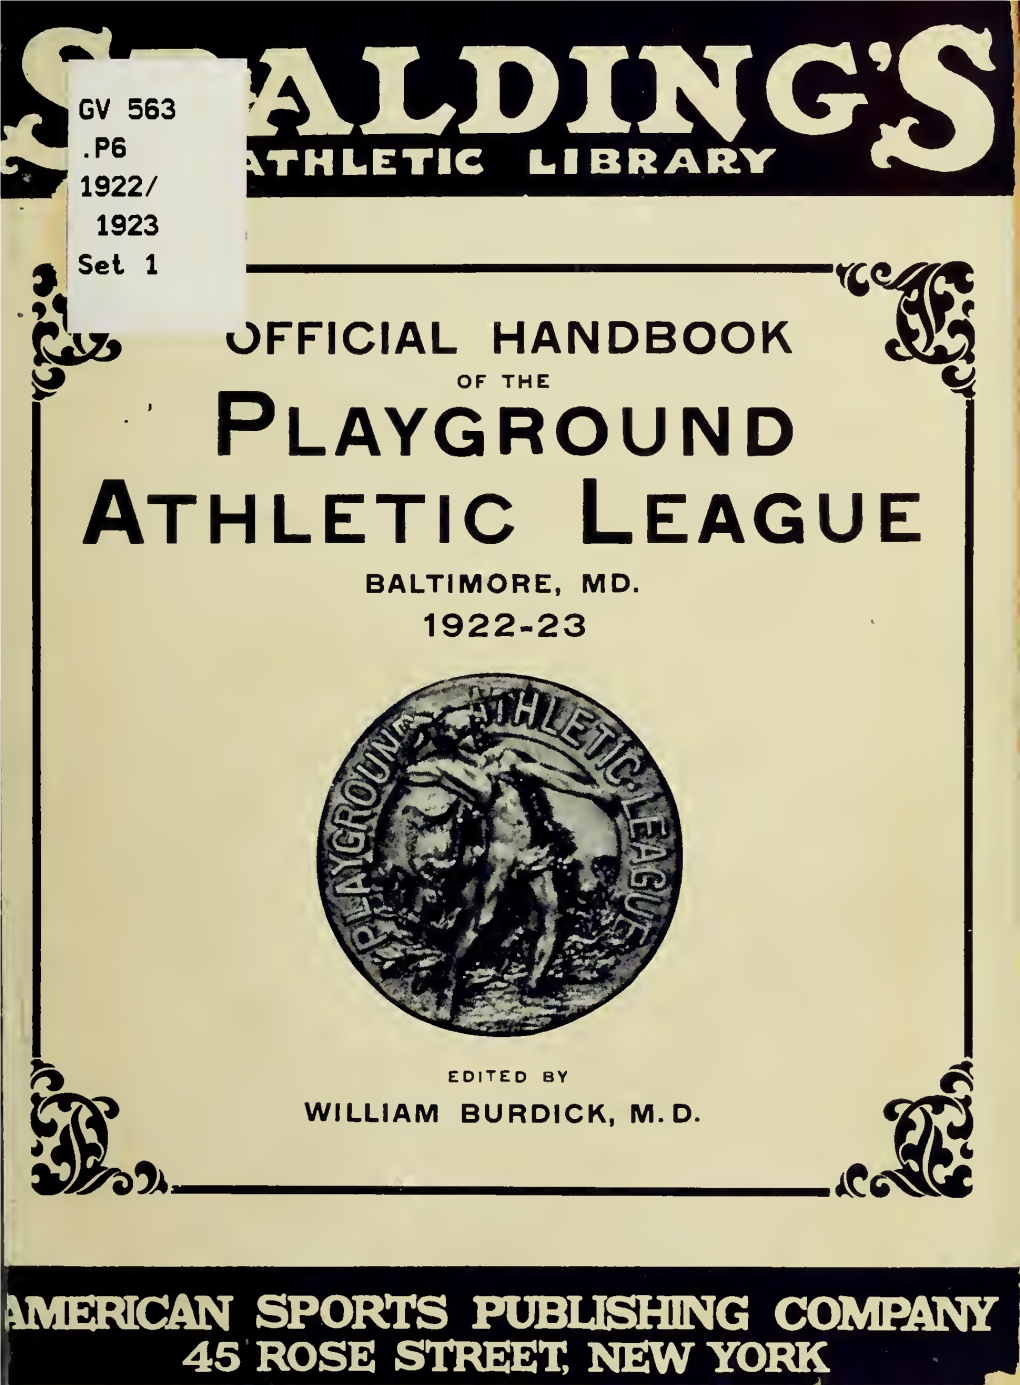 Official Handbook of the Playground Athletic League, Baltimore, Md.